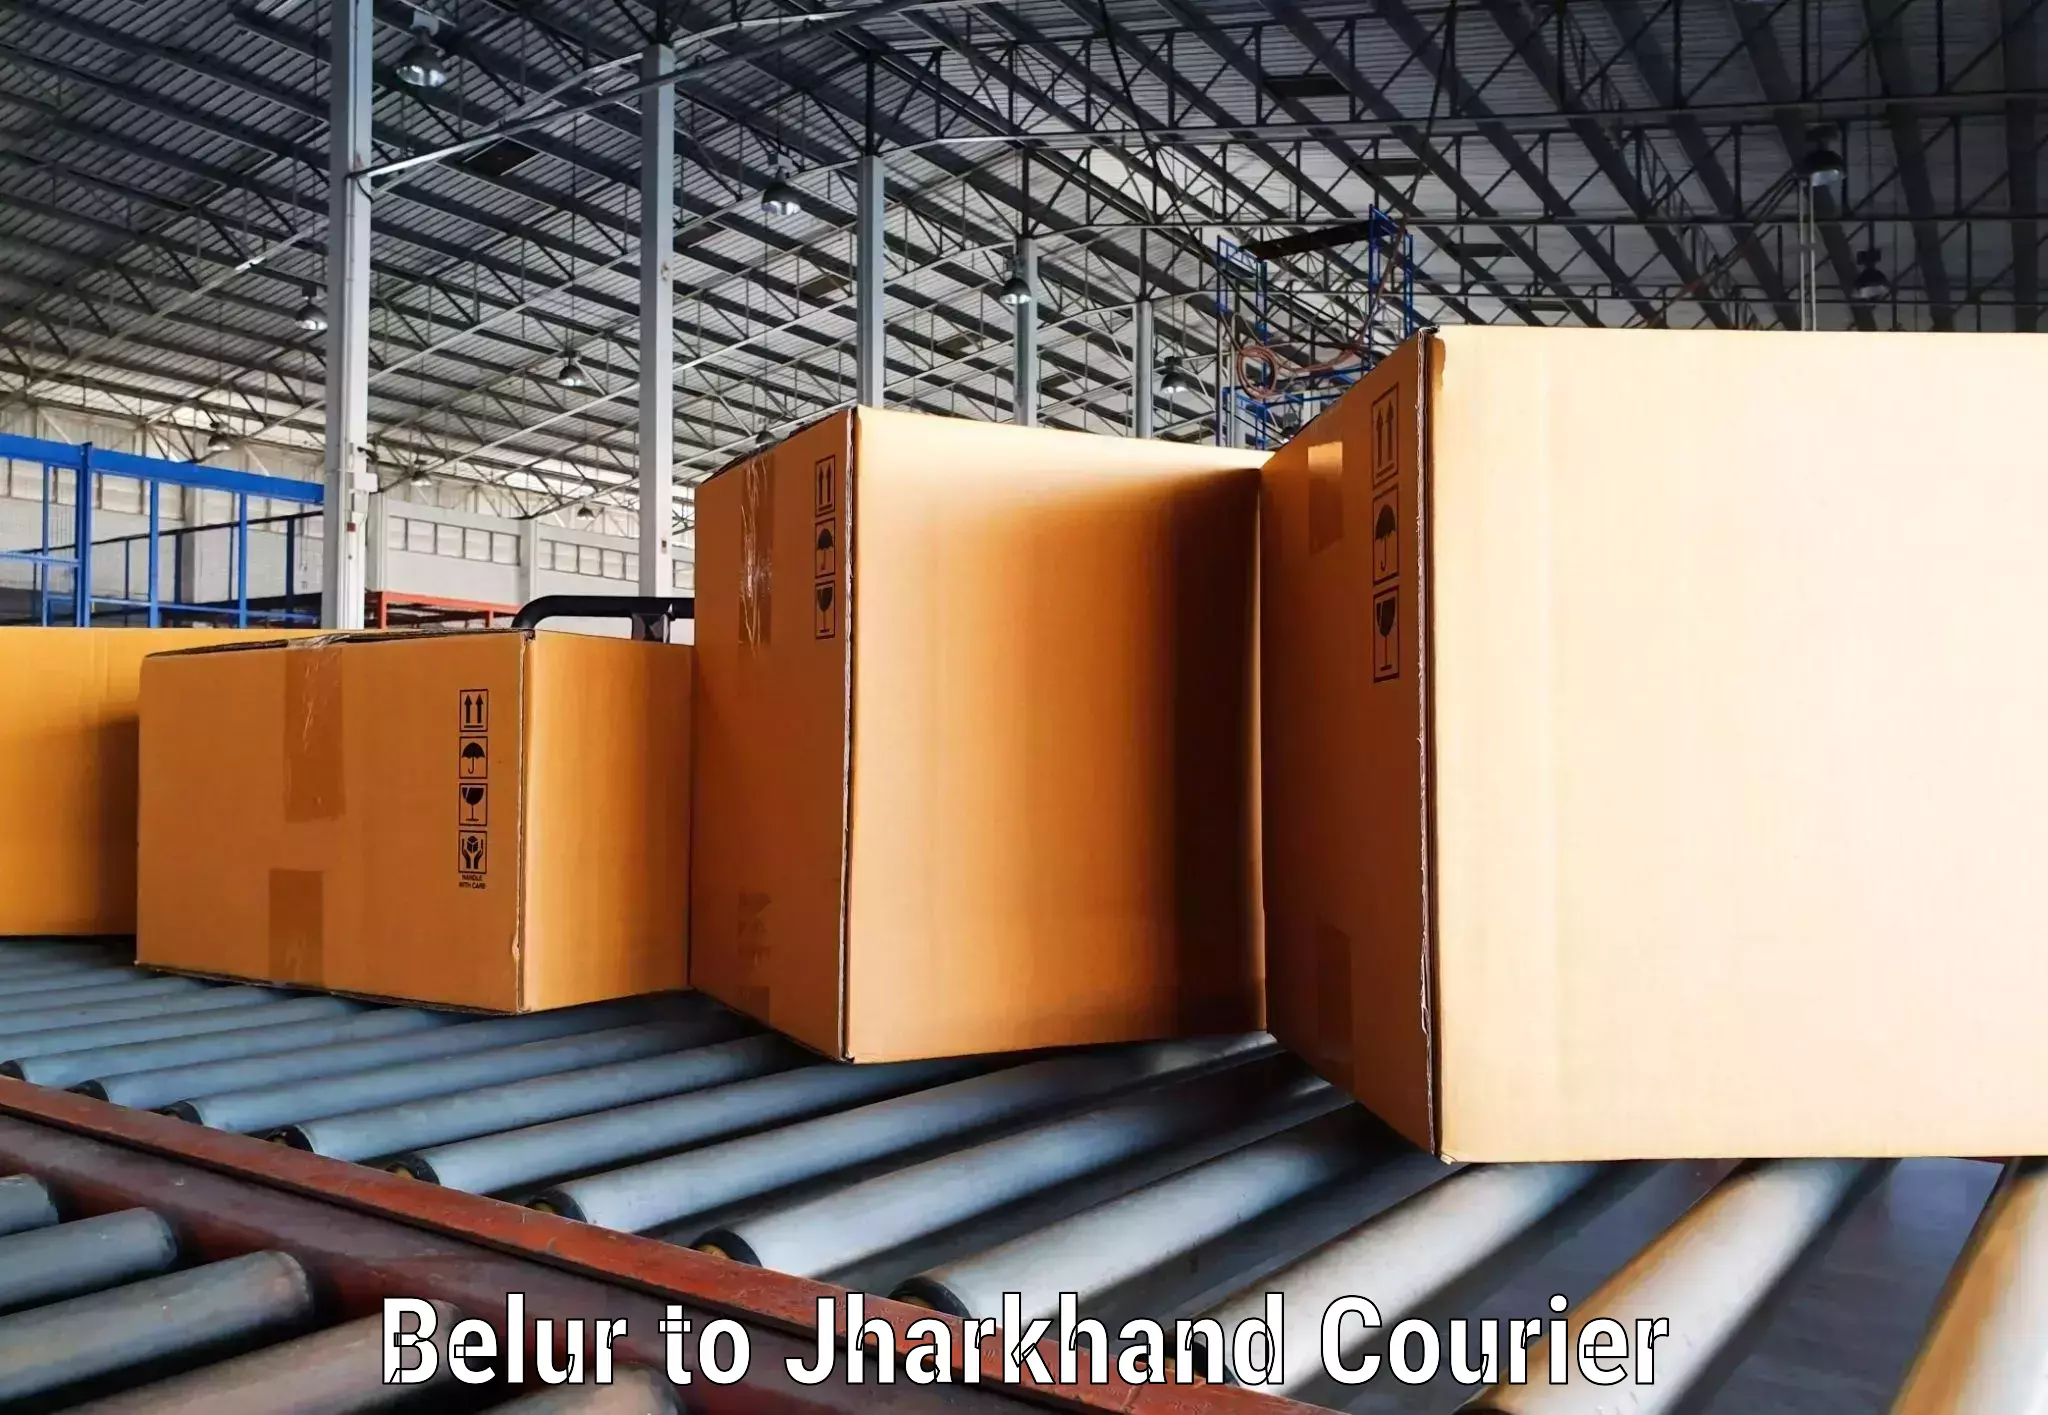 State-of-the-art courier technology Belur to Hazaribagh